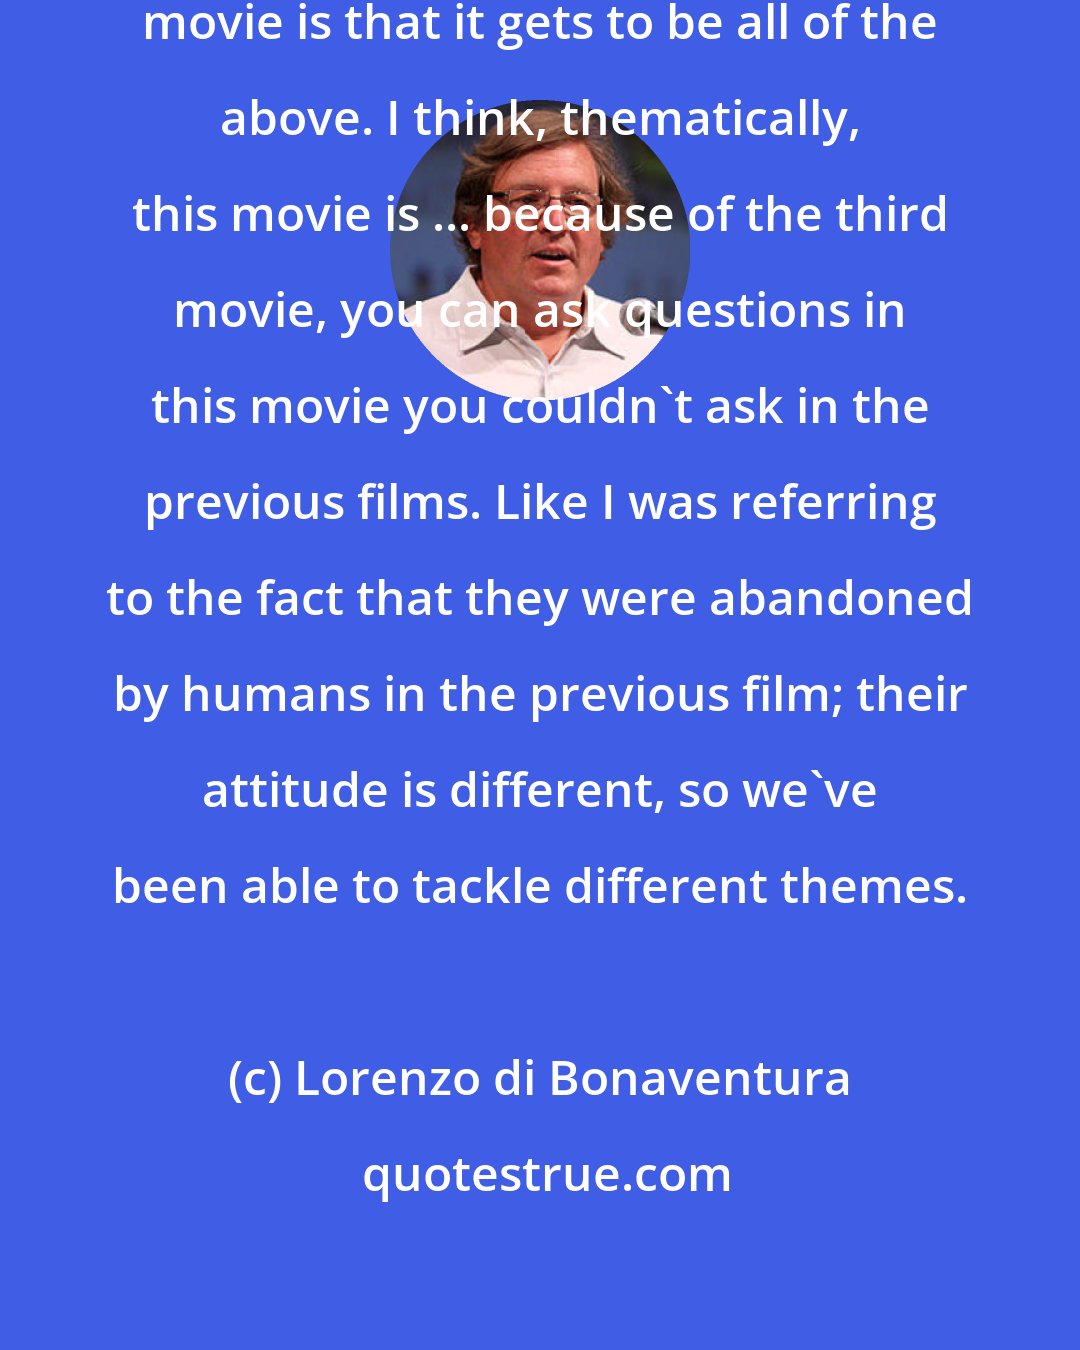 Lorenzo di Bonaventura: I think what's fun of making a Transformers movie is that it gets to be all of the above. I think, thematically, this movie is ... because of the third movie, you can ask questions in this movie you couldn't ask in the previous films. Like I was referring to the fact that they were abandoned by humans in the previous film; their attitude is different, so we've been able to tackle different themes.